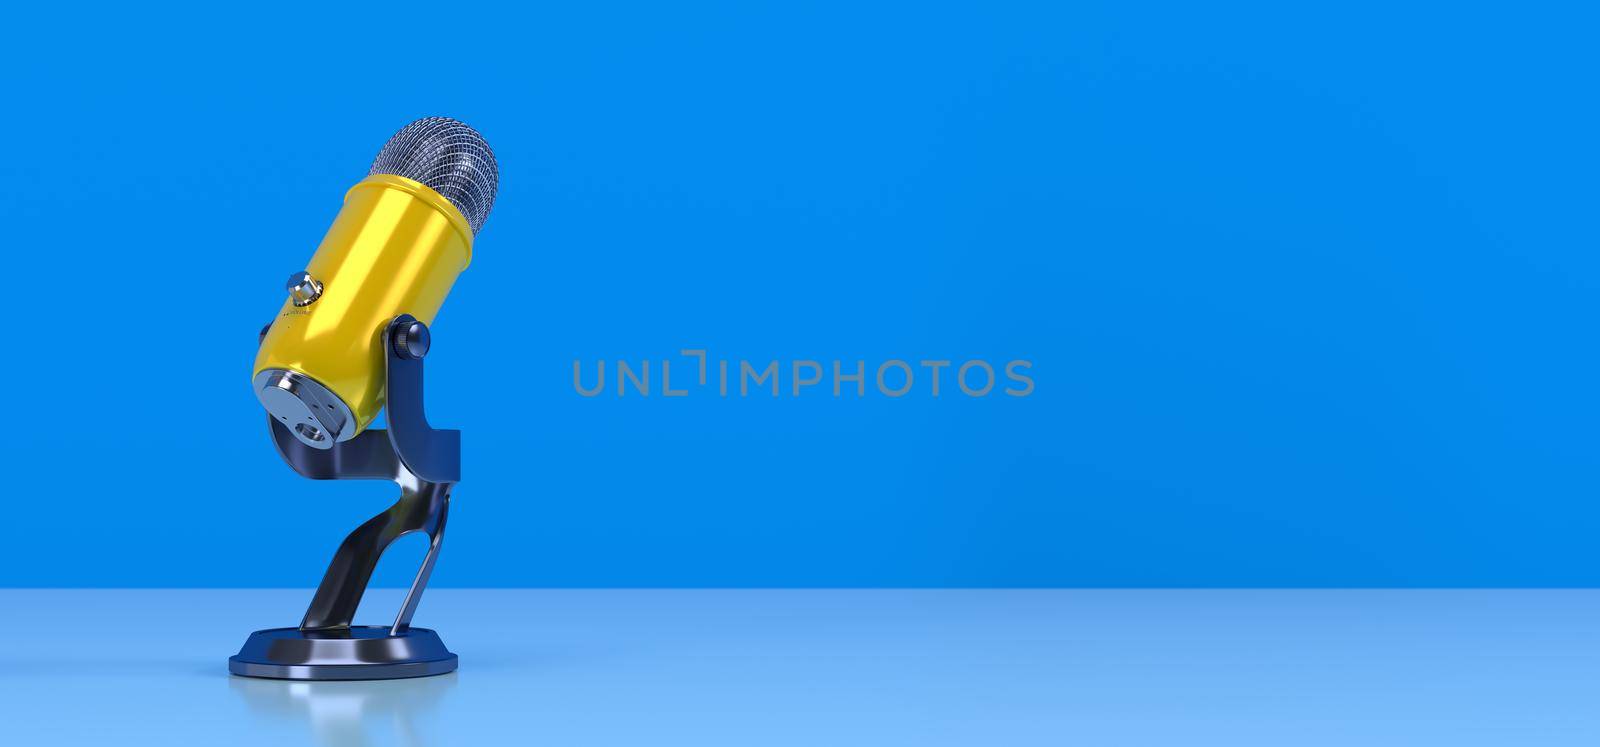 Yellow PODCAST Microphone on blue background. Entertainment and online video conference concept. 3D illustration rendering by MiniStocker